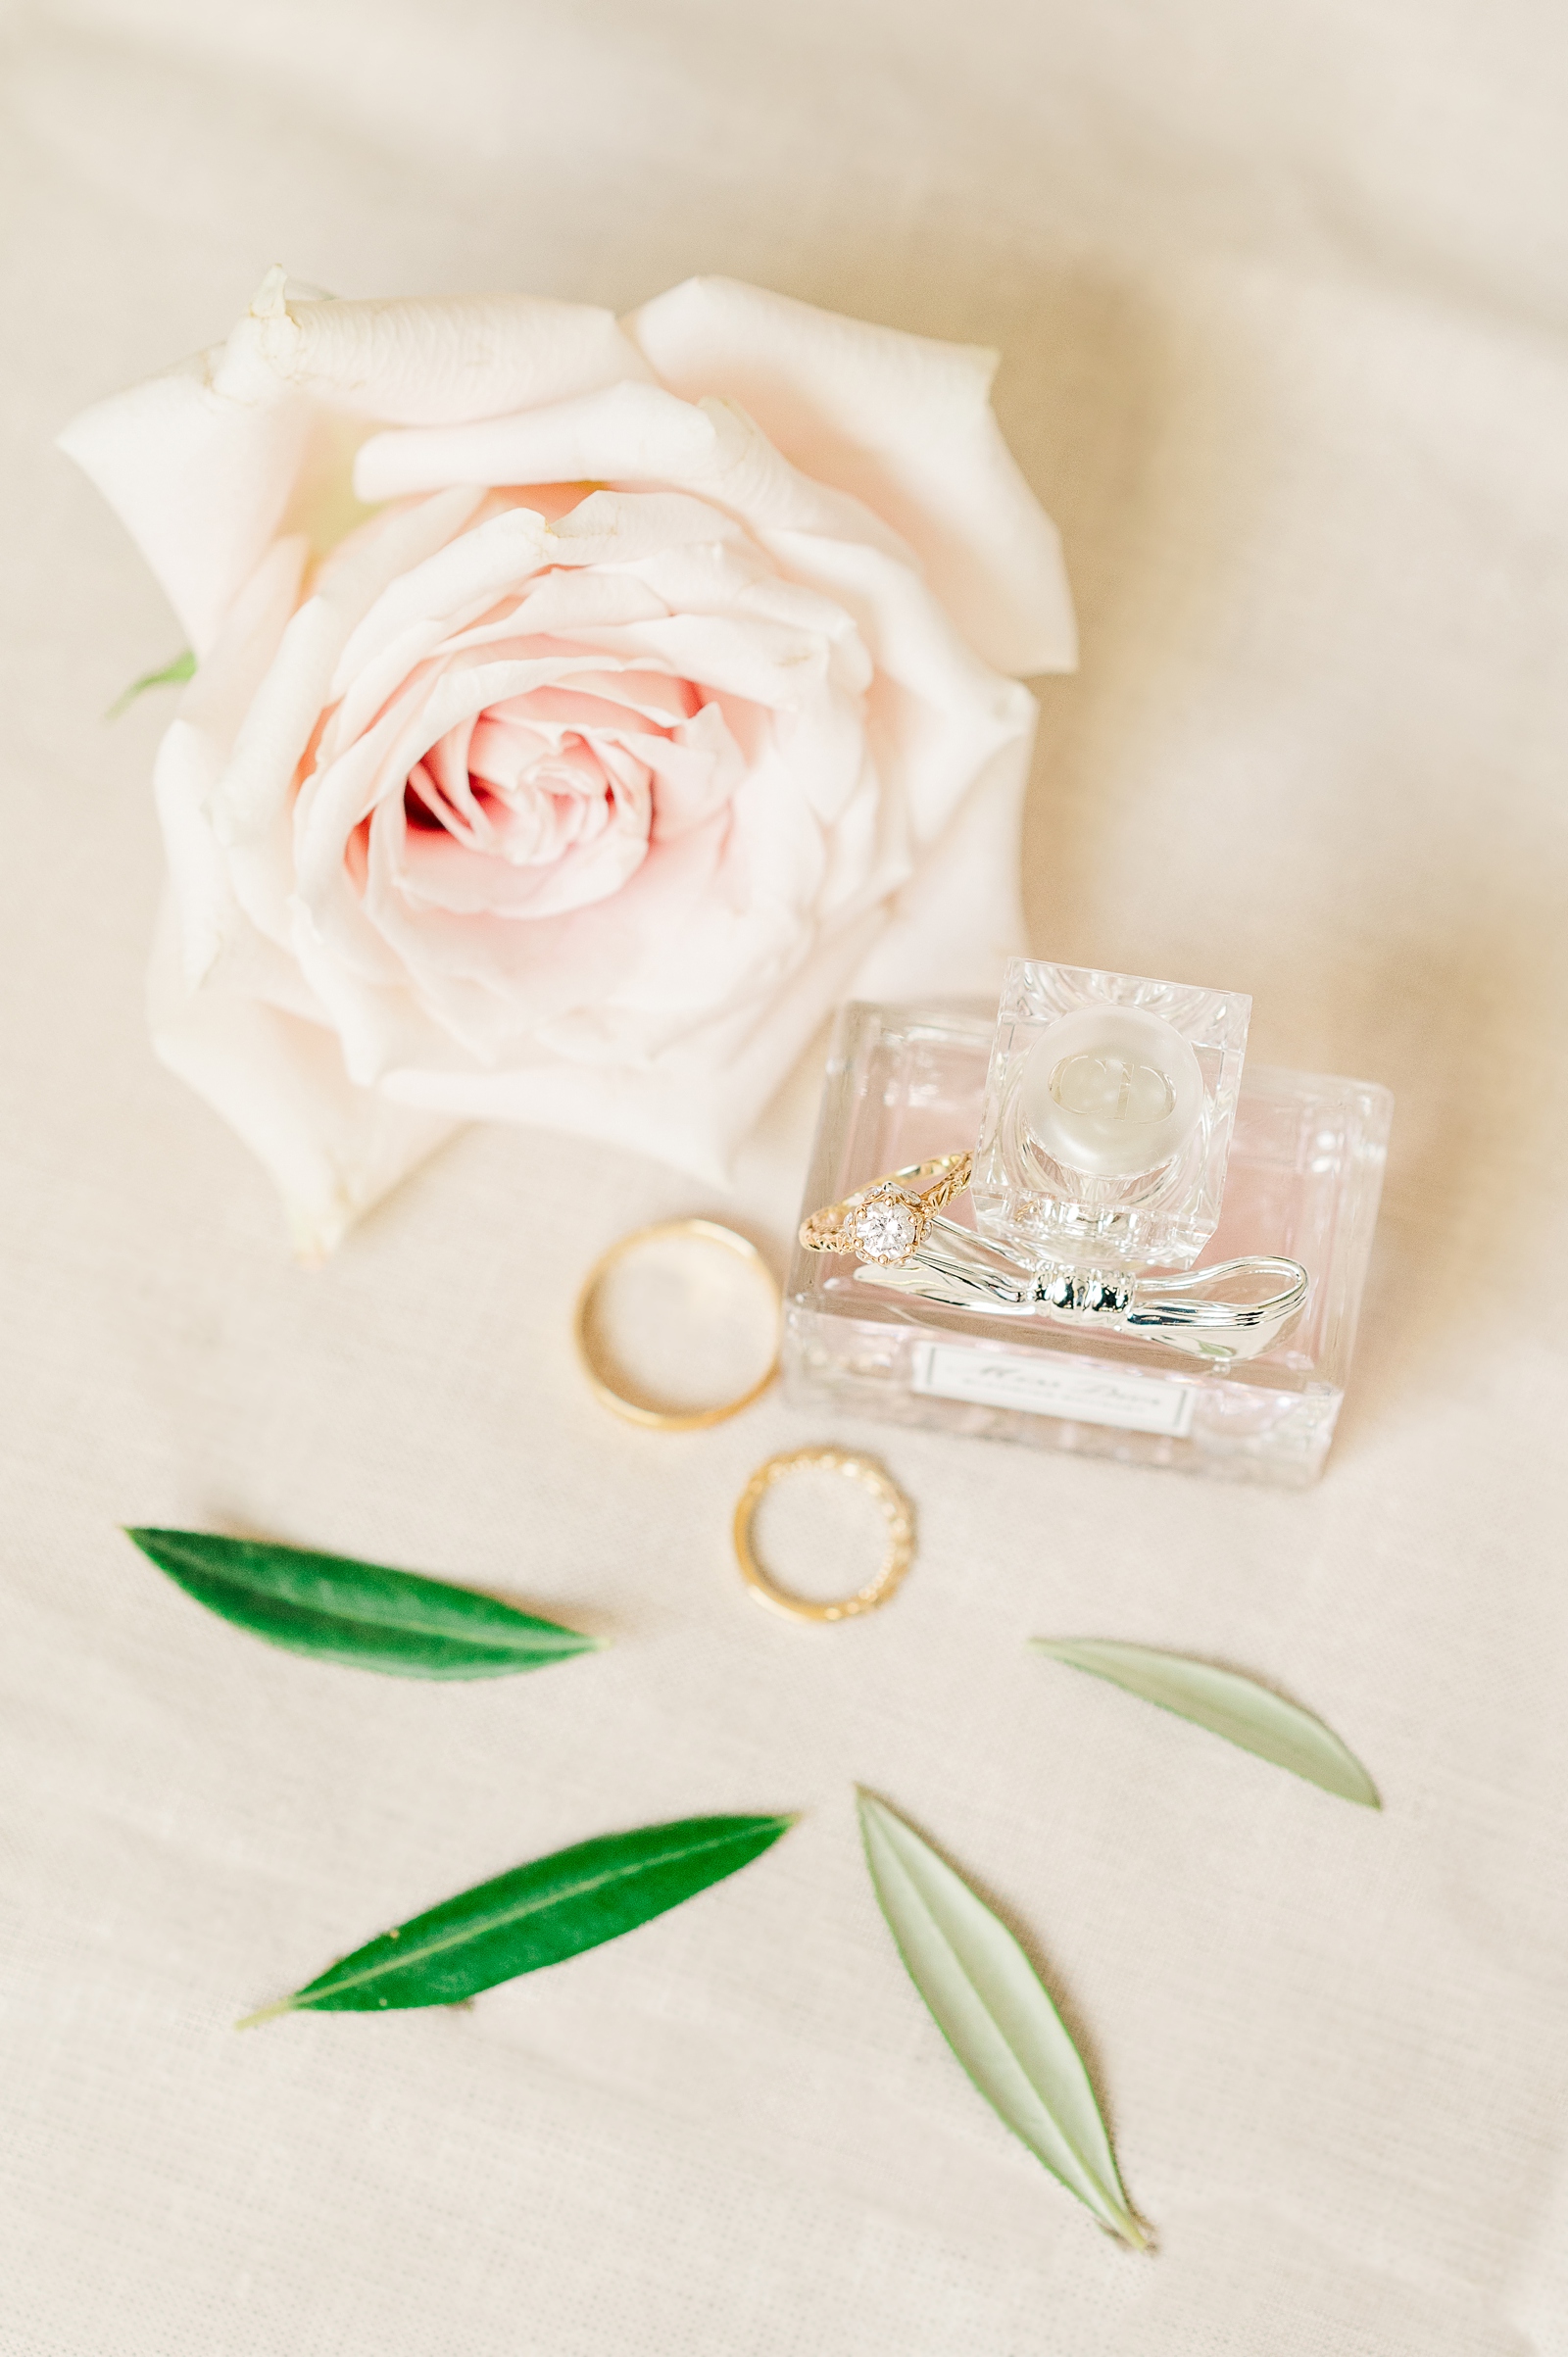 Bridal Details at Richmond Omni Hotel Intimate Wedding. Photography by Virginia Intimate Wedding Photographer Kailey Brianne Photography.
